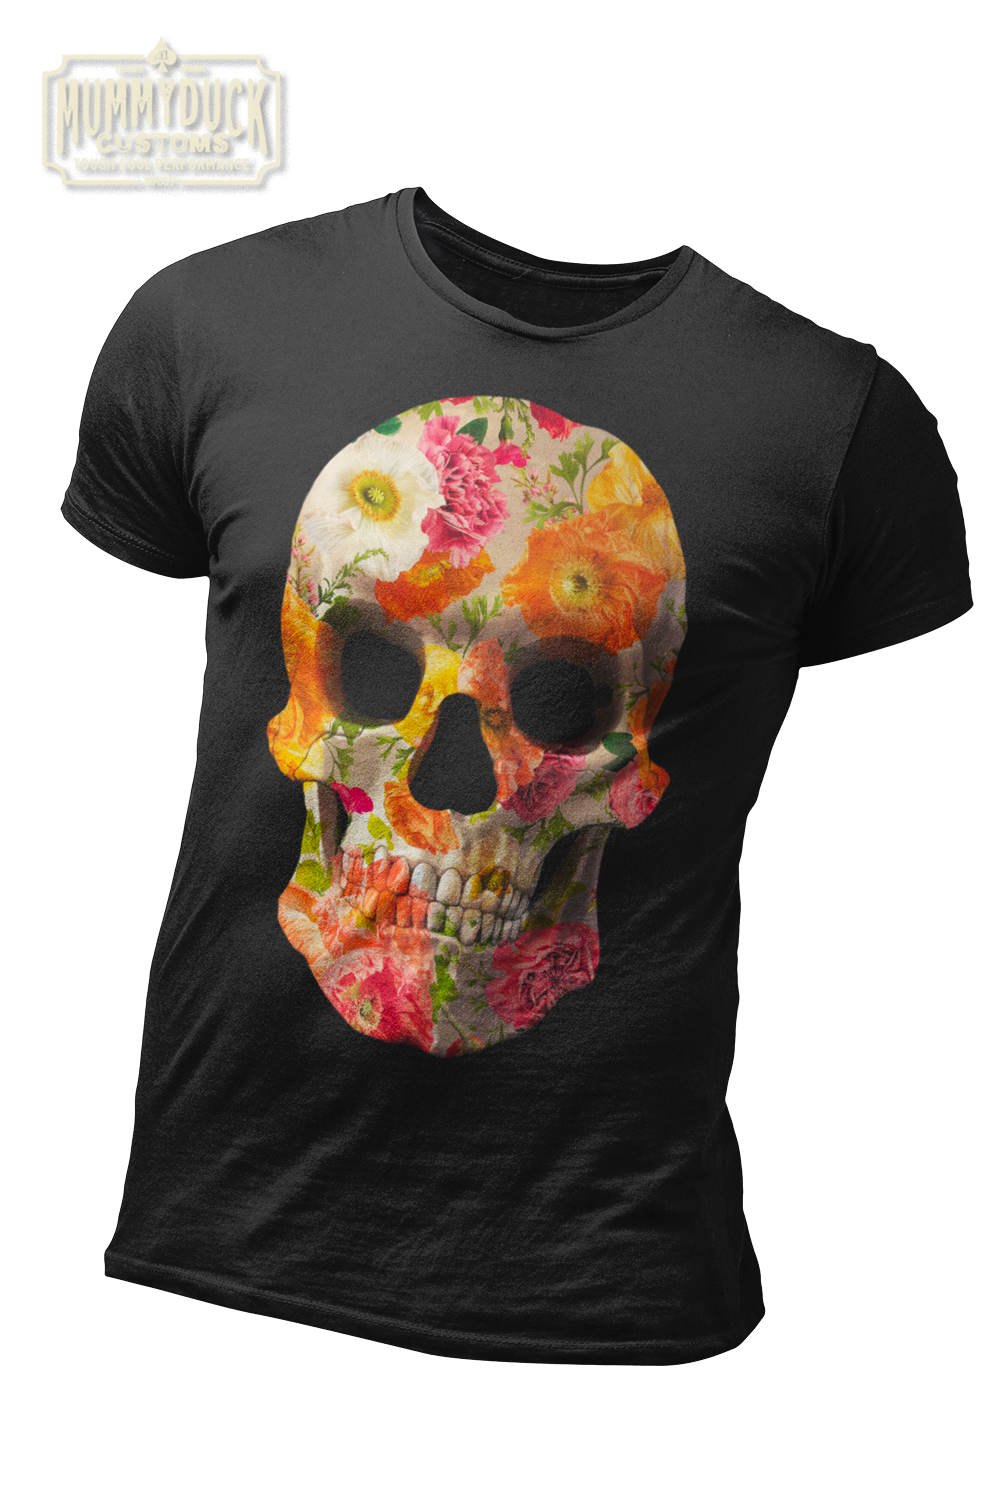 black t-shirt with flower texture skull